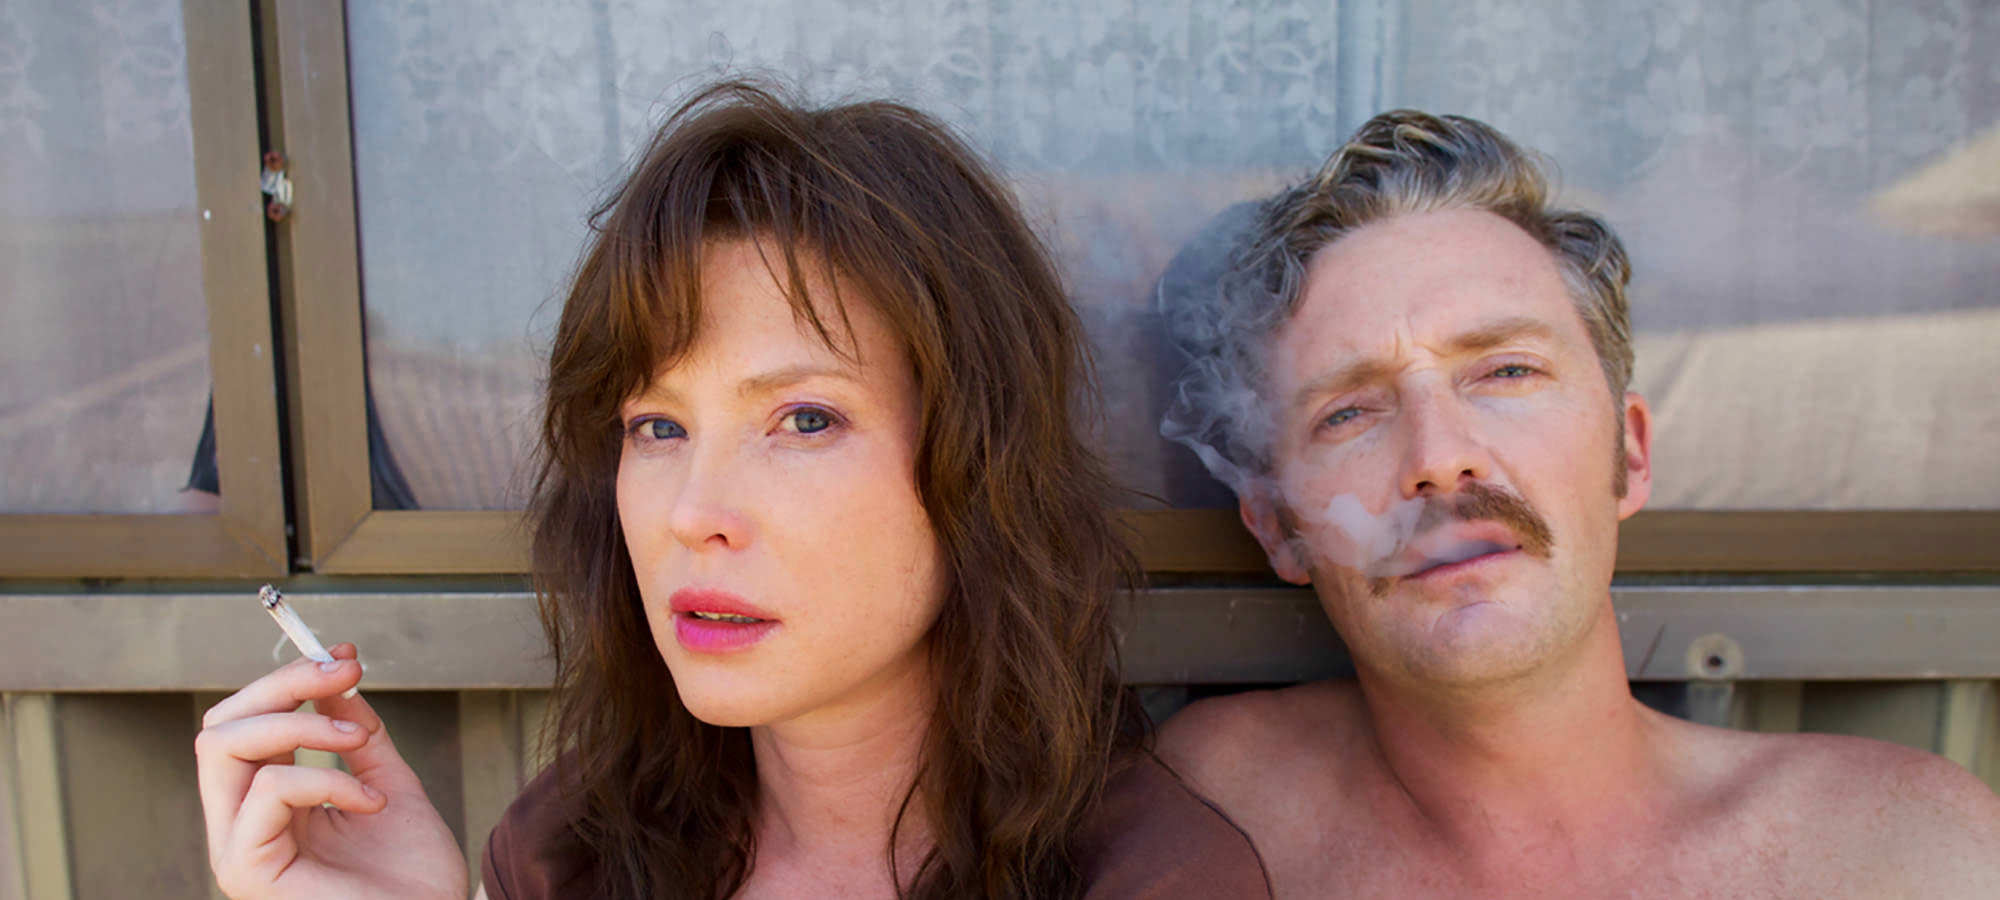 Hounds of Love Movie Essay - 2016 Ben Young Film